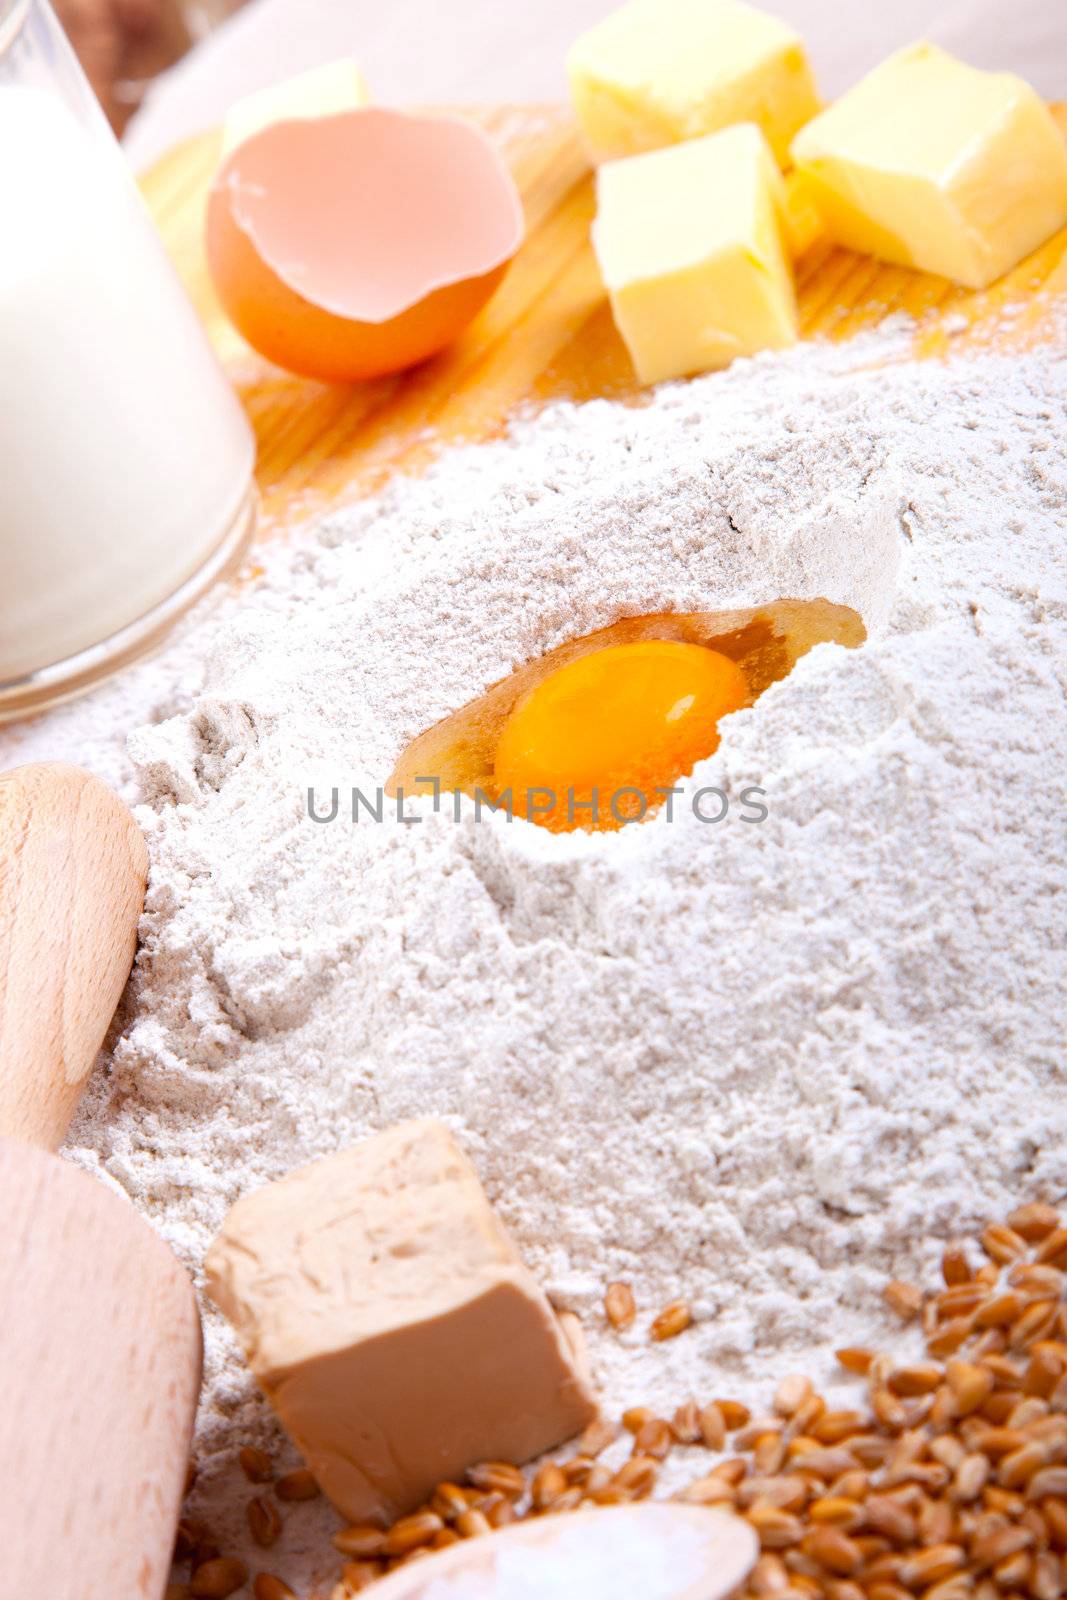 flour and eggs, butter, ingredients for baking.